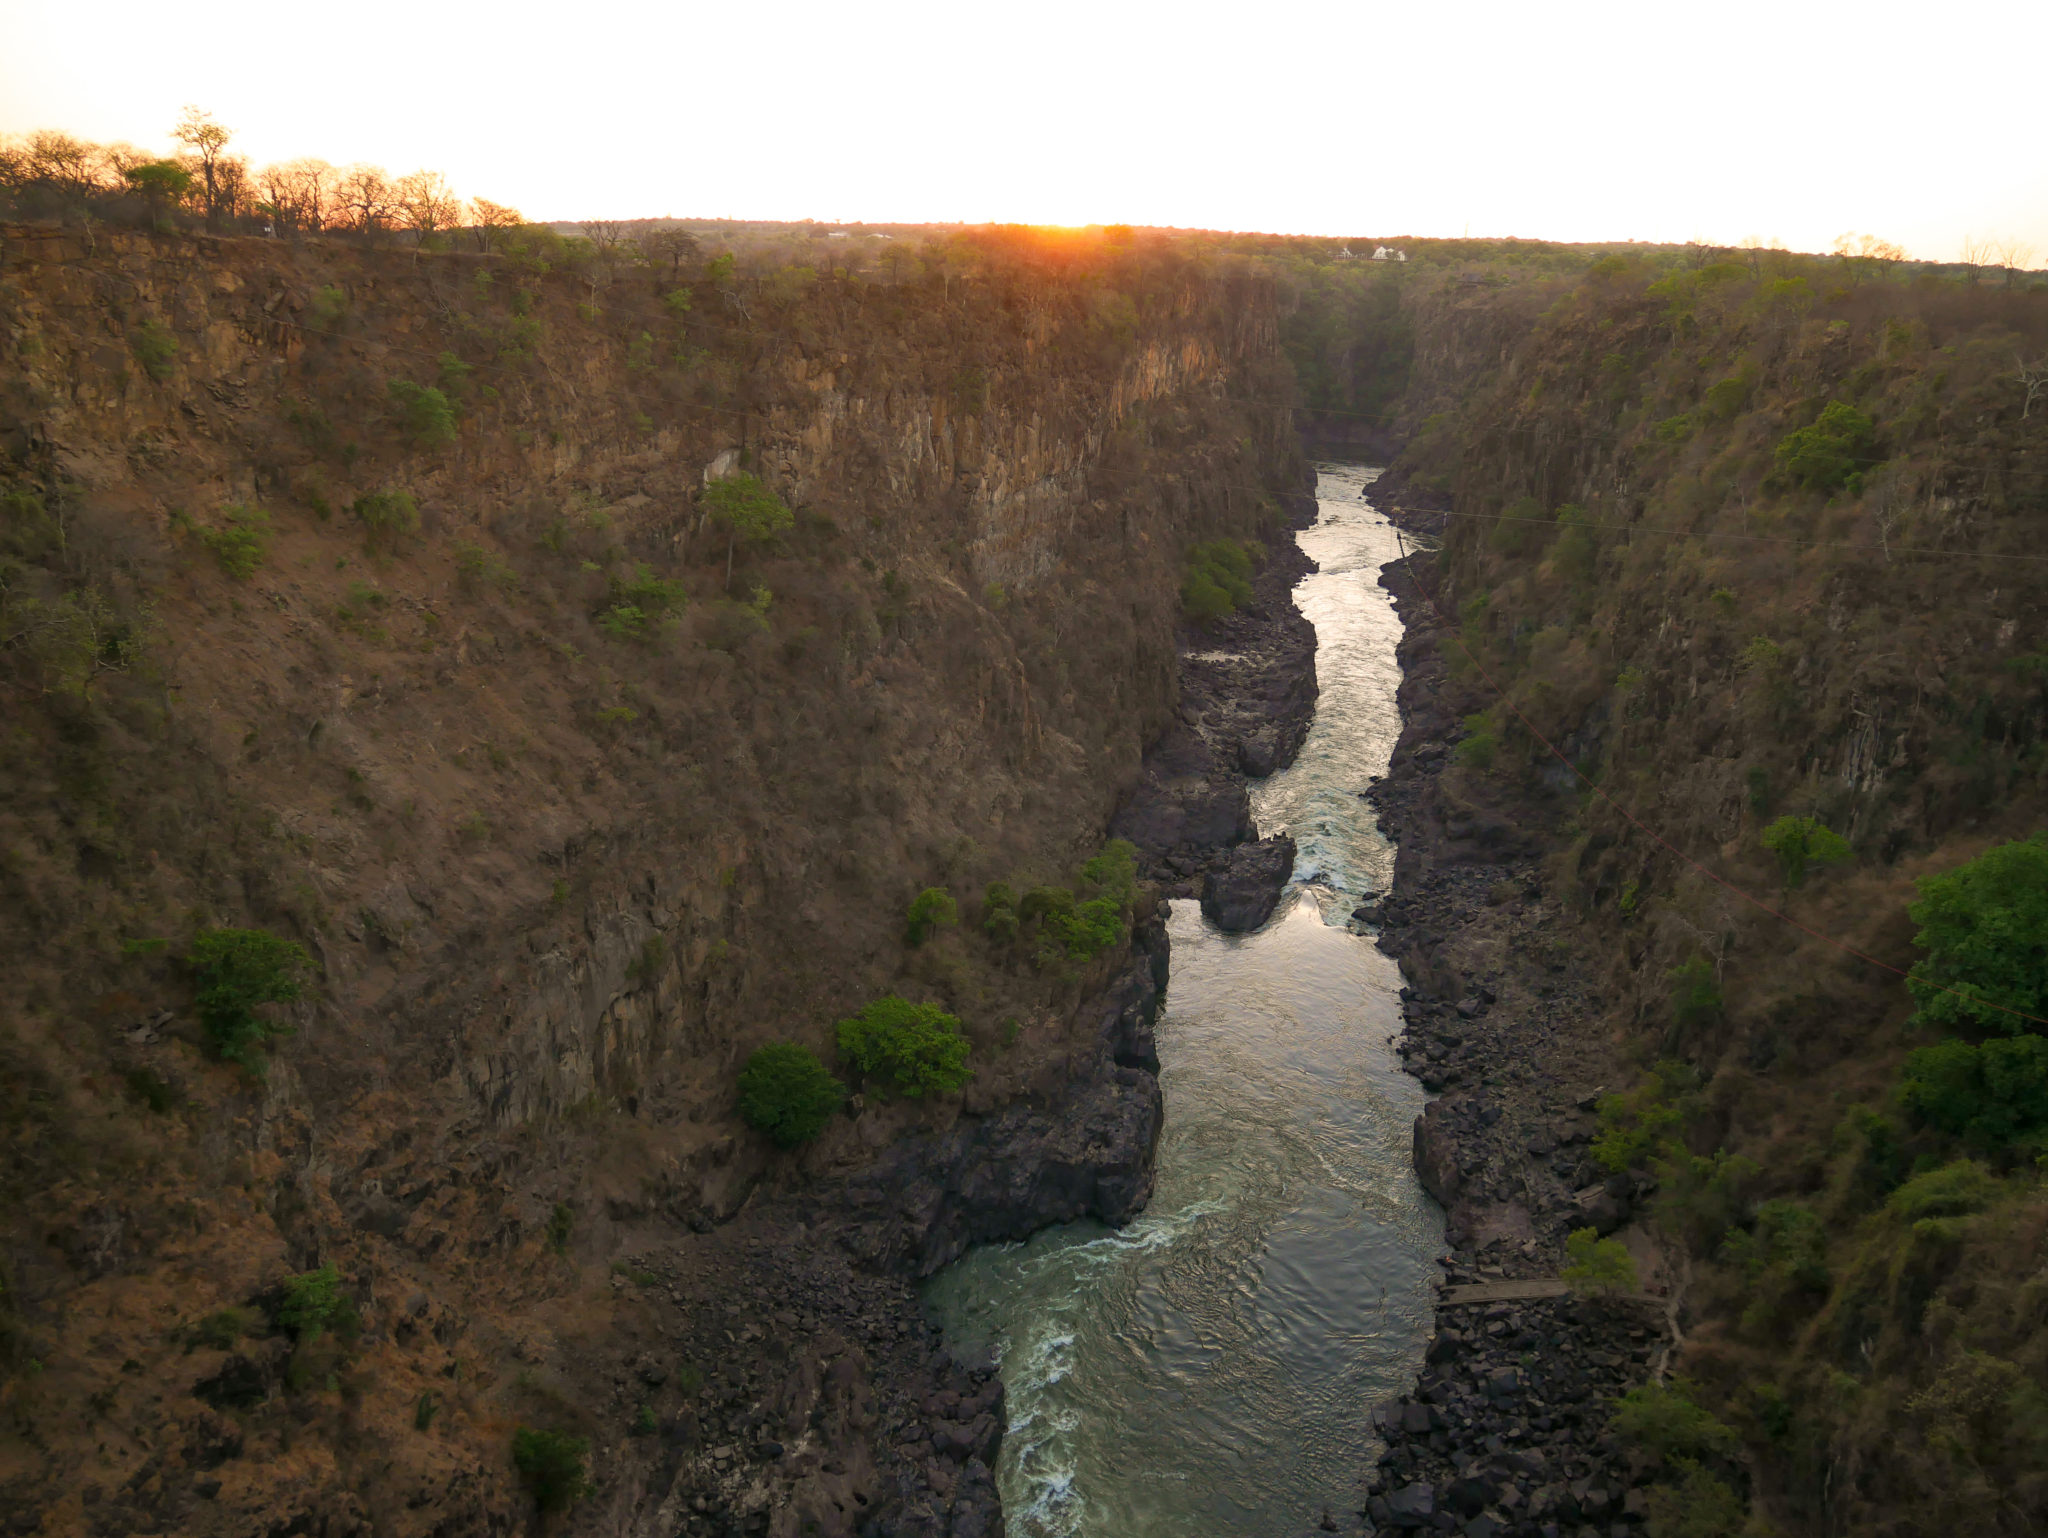 The sun sets over the Victoria Falls gorge with Victoria Falls Hotel in the distance